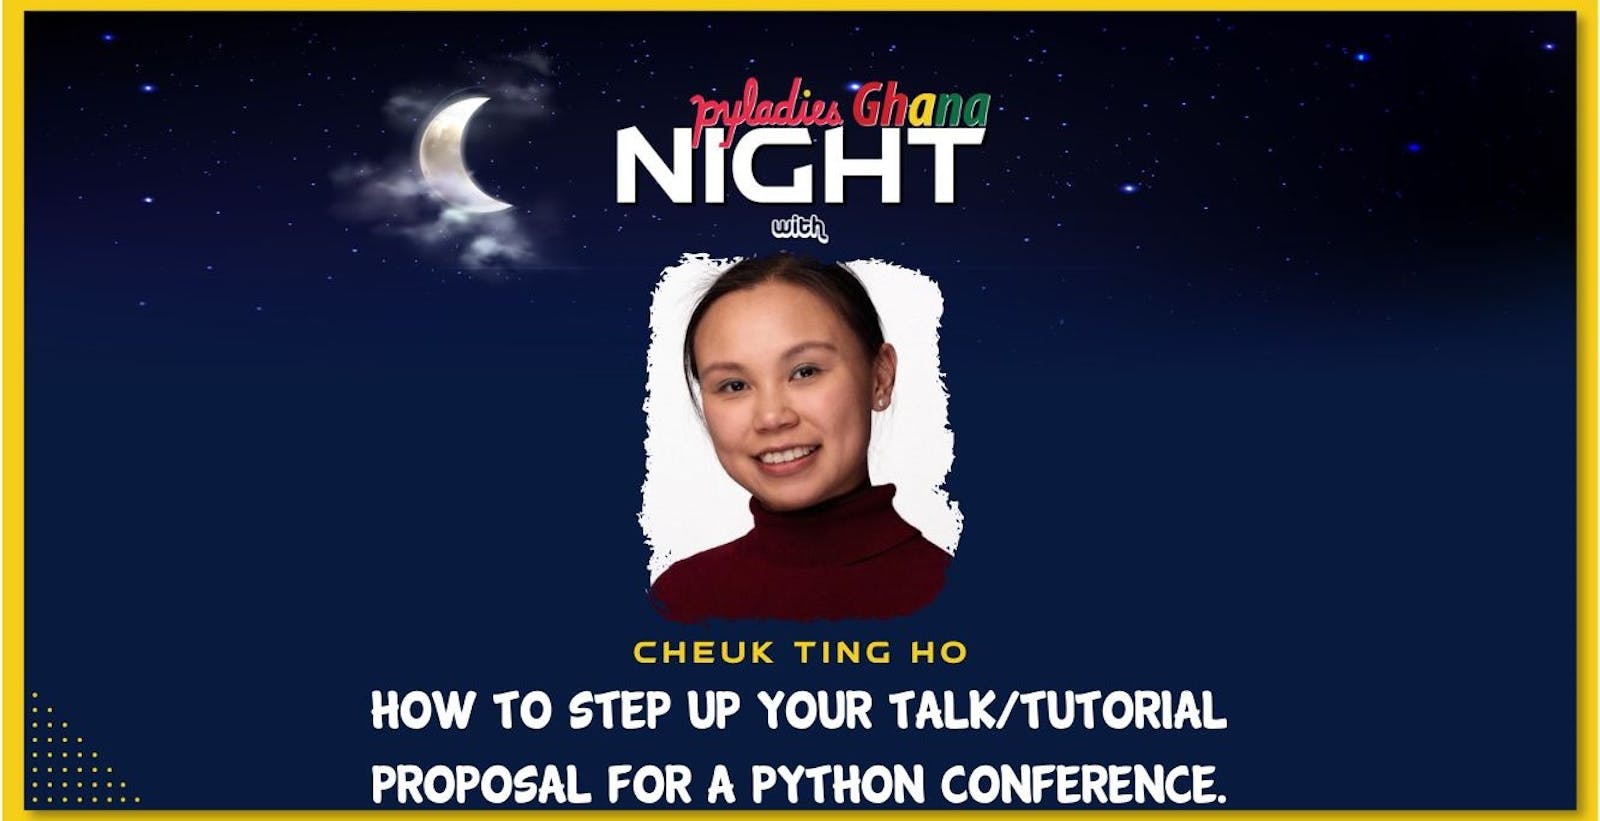 How to set up your talk or tutorial proposal for a Python conference